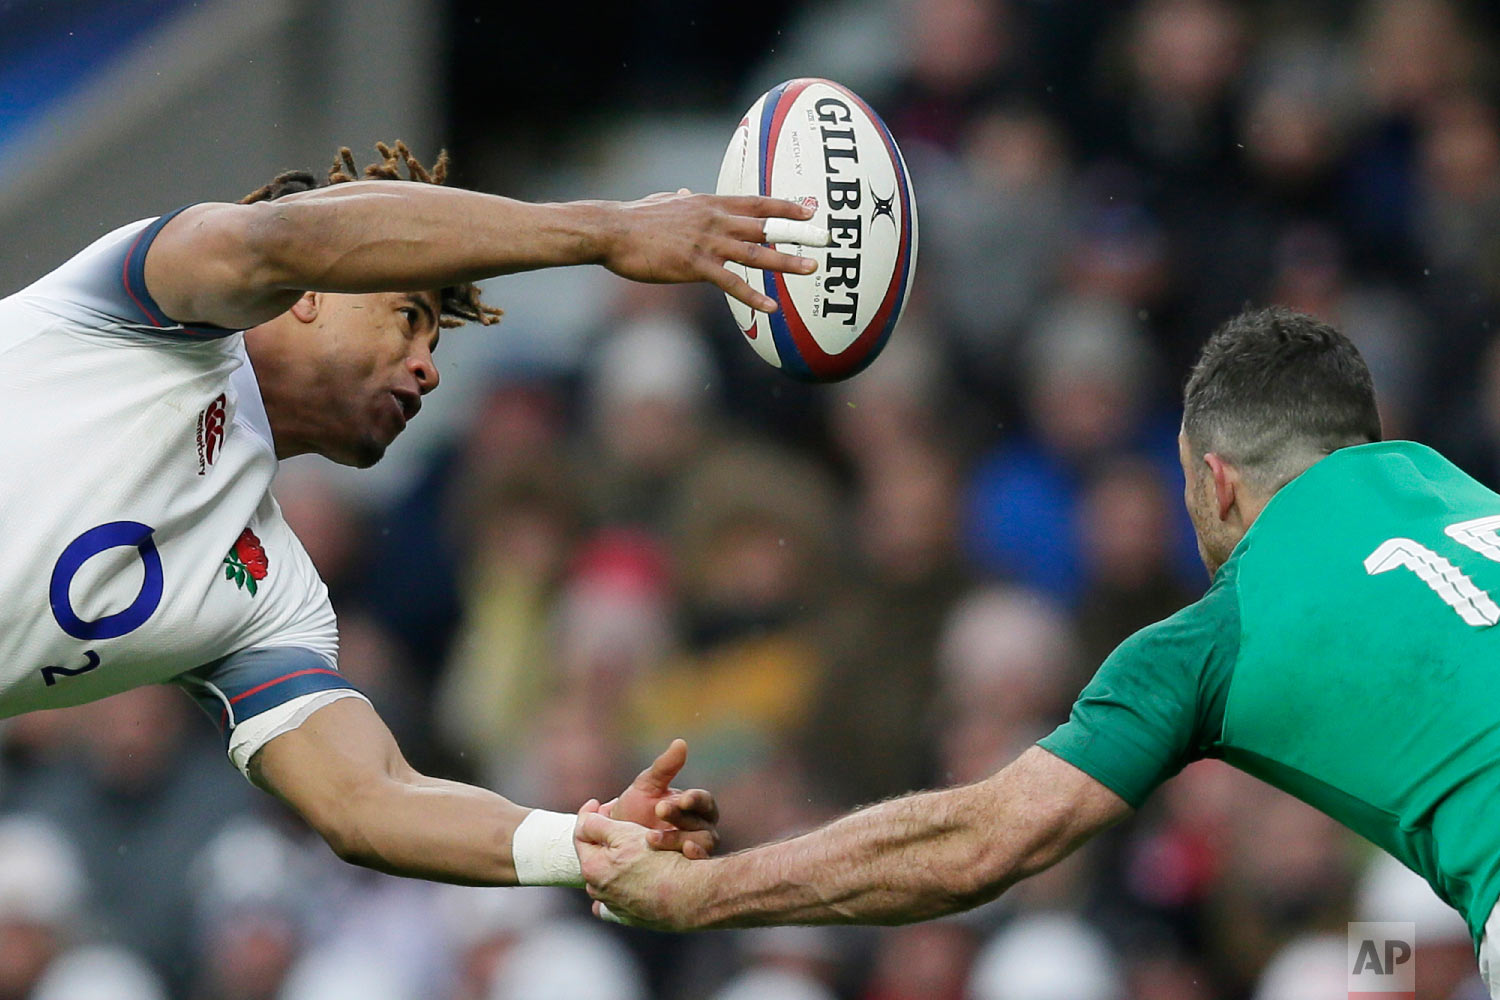  England's Anthony Watson, left, and Ireland's Rob Kearney try to catch the ball during the Six Nations rugby union match between England and Ireland at Twickenham stadium in London on March 17, 2018. (AP Photo/Tim Ireland) 